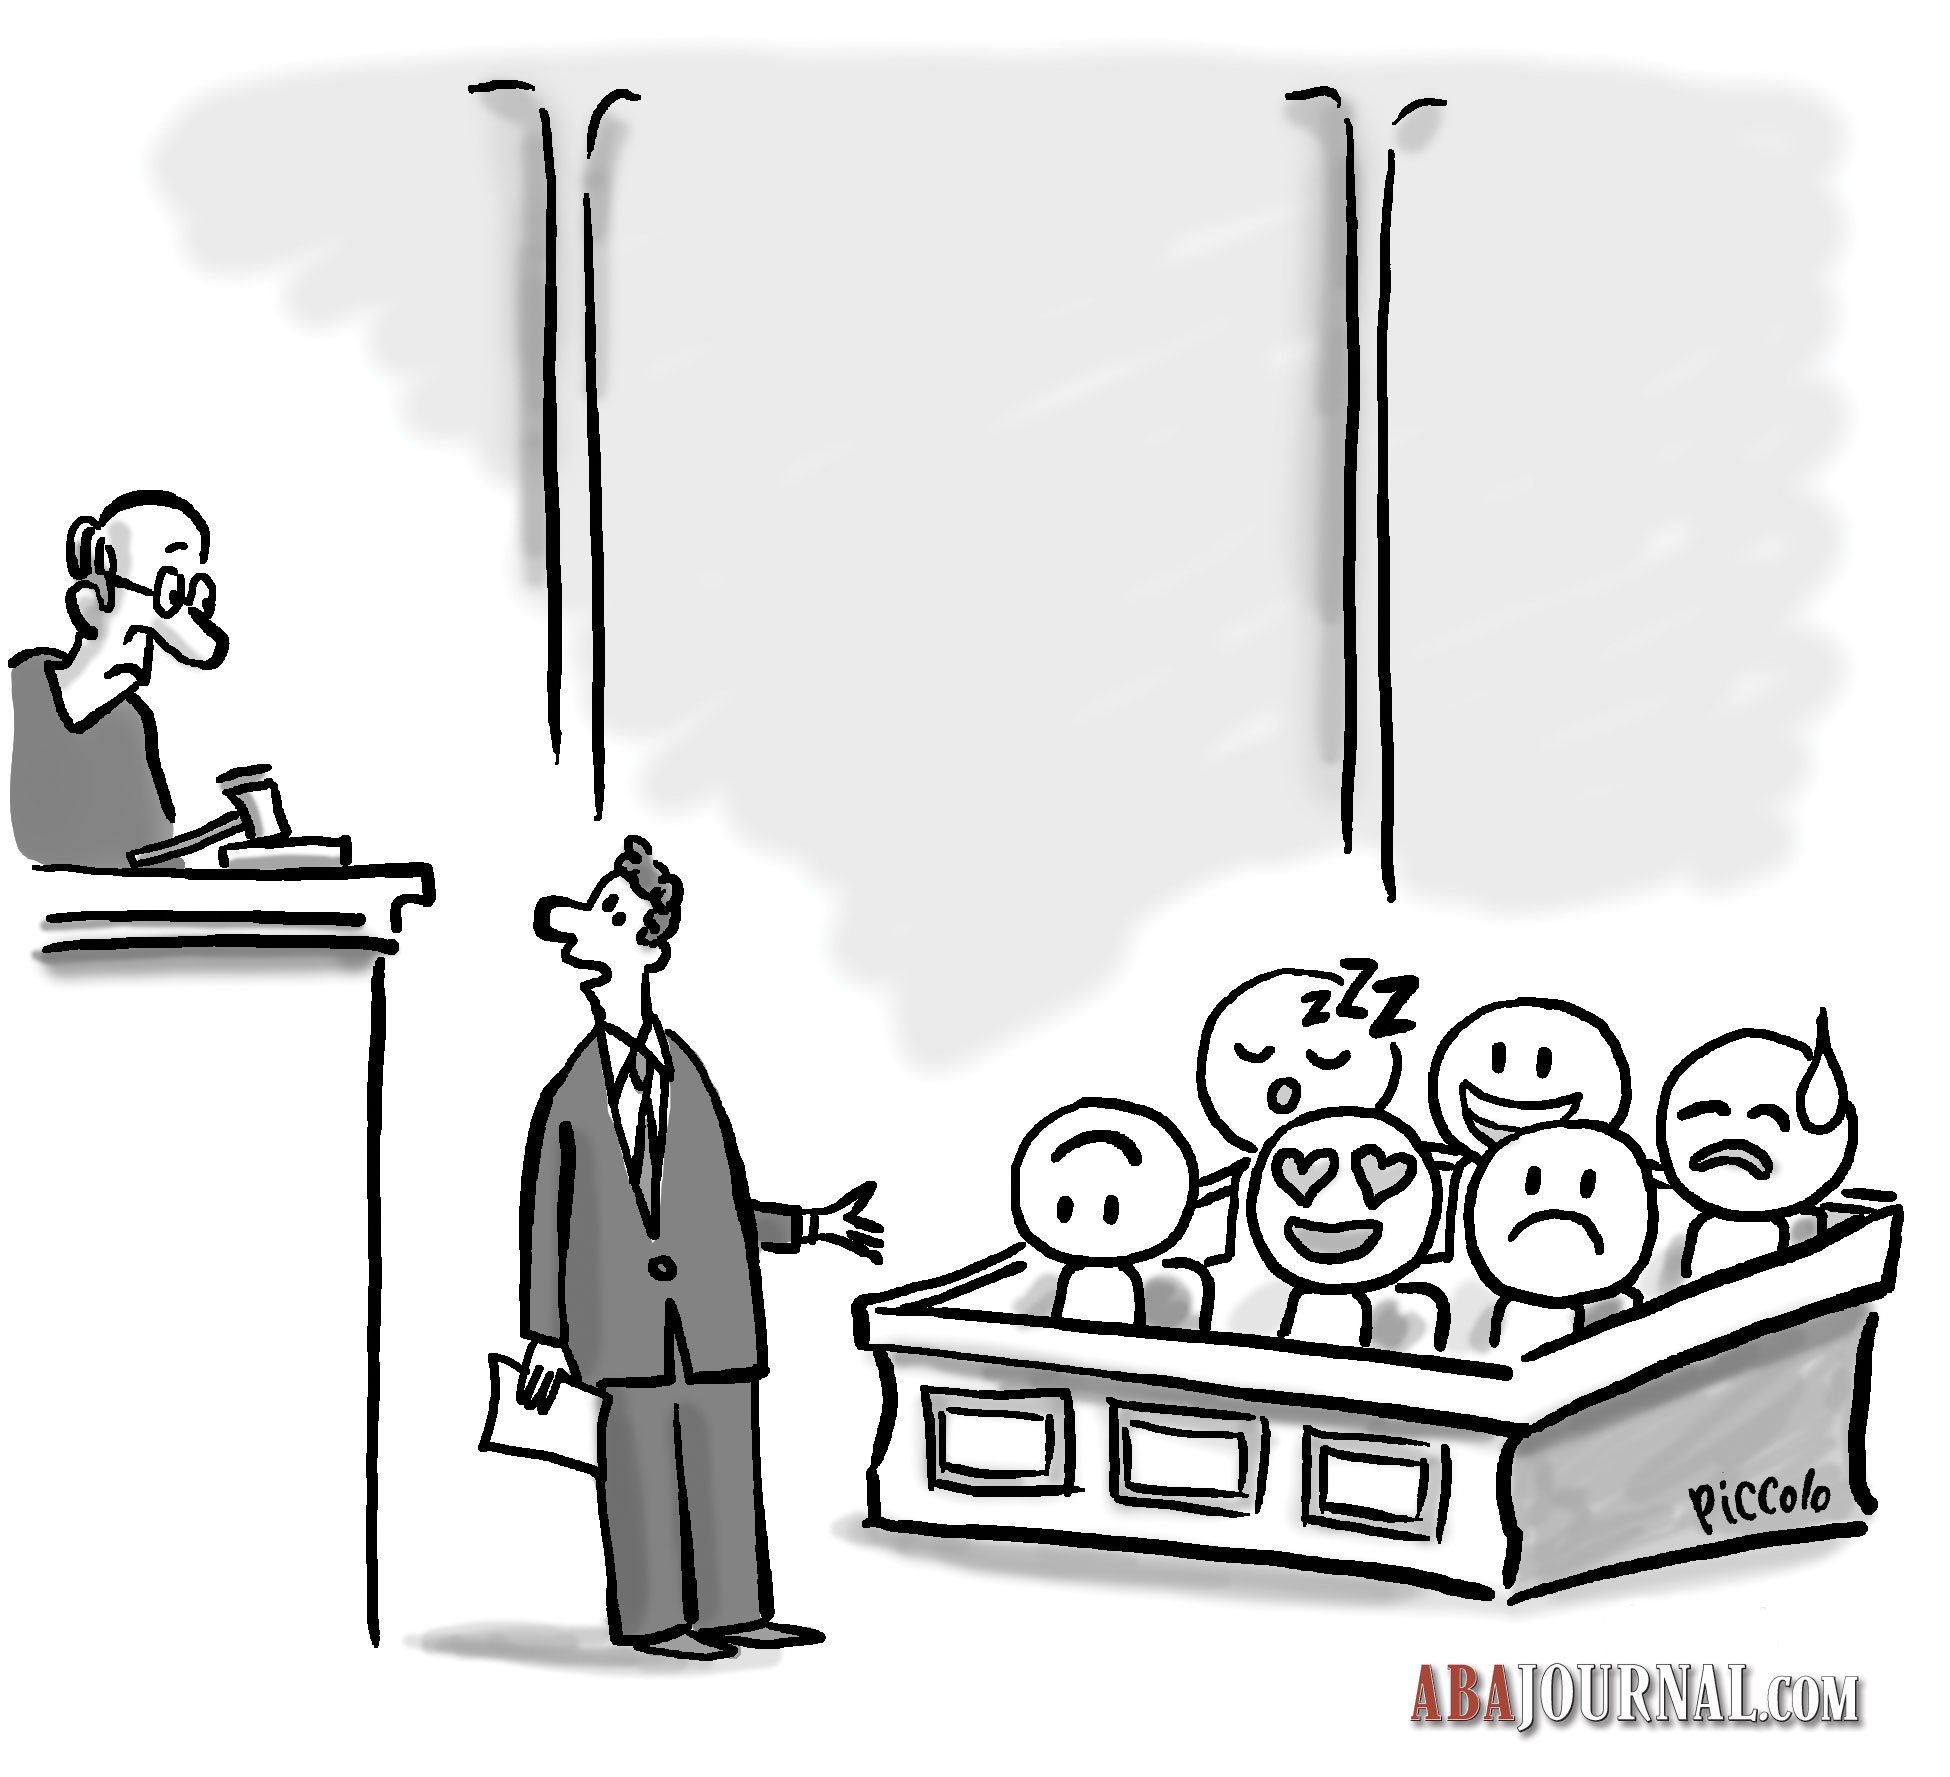 Cartoon Caption: Can these jurors keep a straight face for the case?